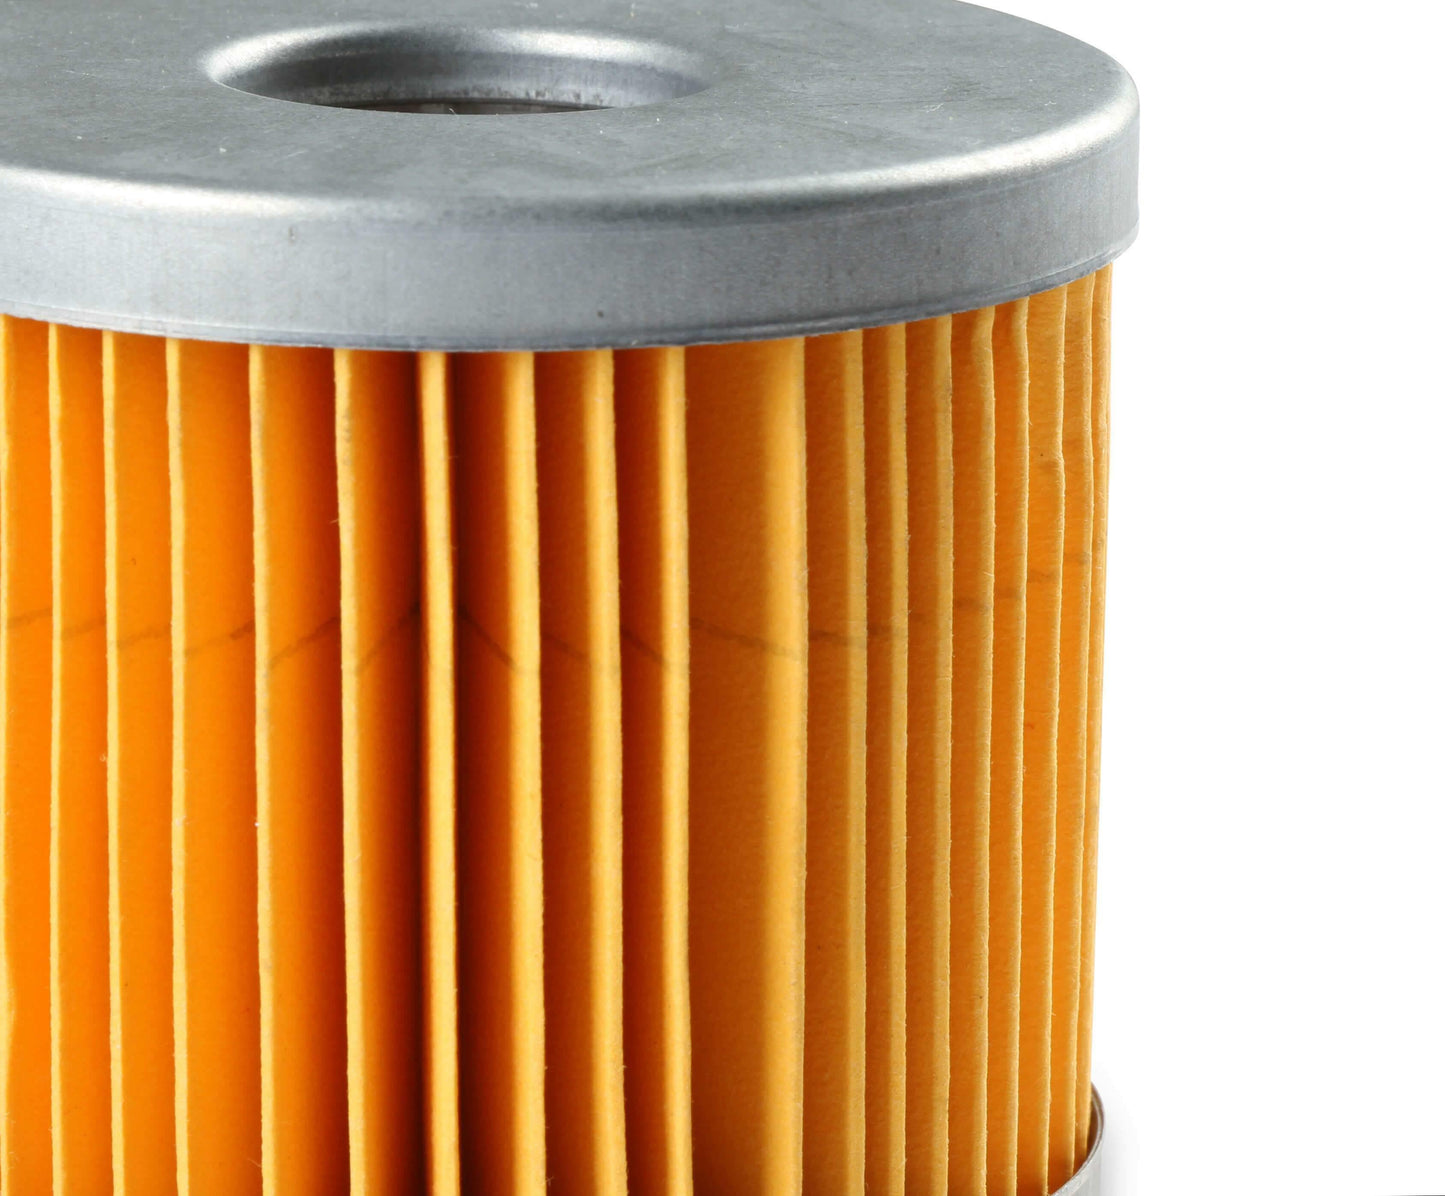 Mallory 29239 Mallory Paper Fuel Filter